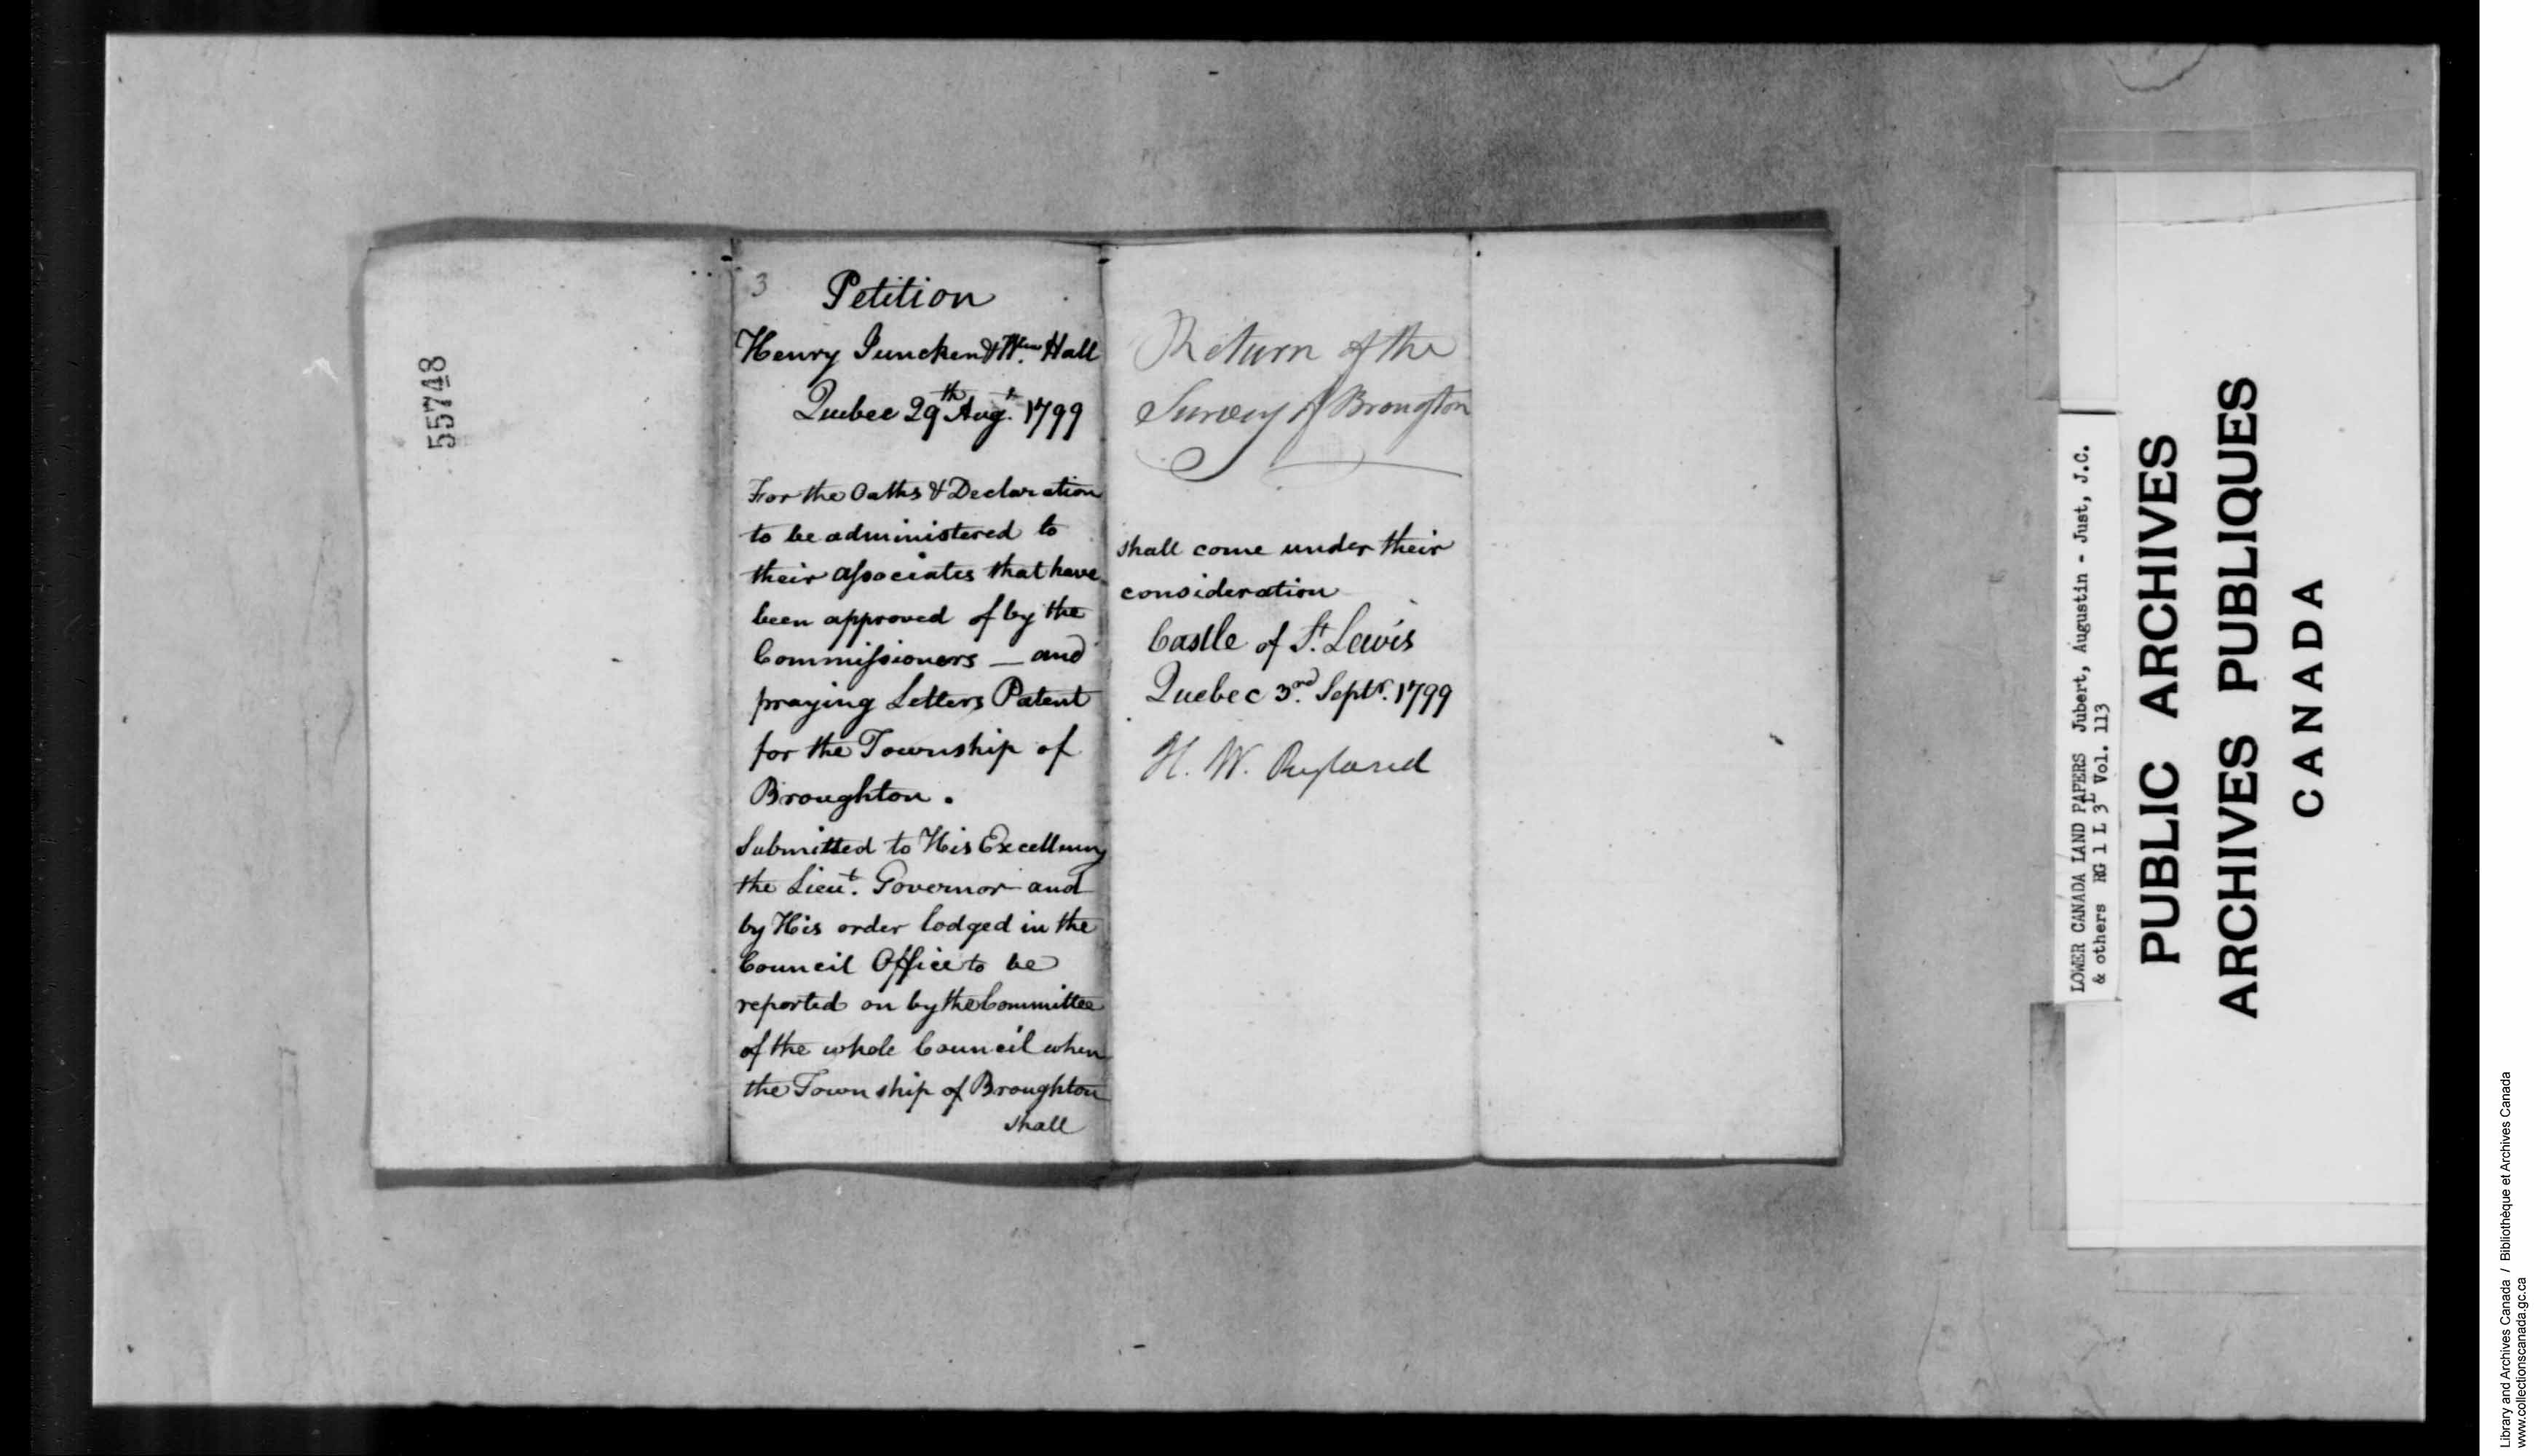 Digitized page of  for Image No.: e008700236